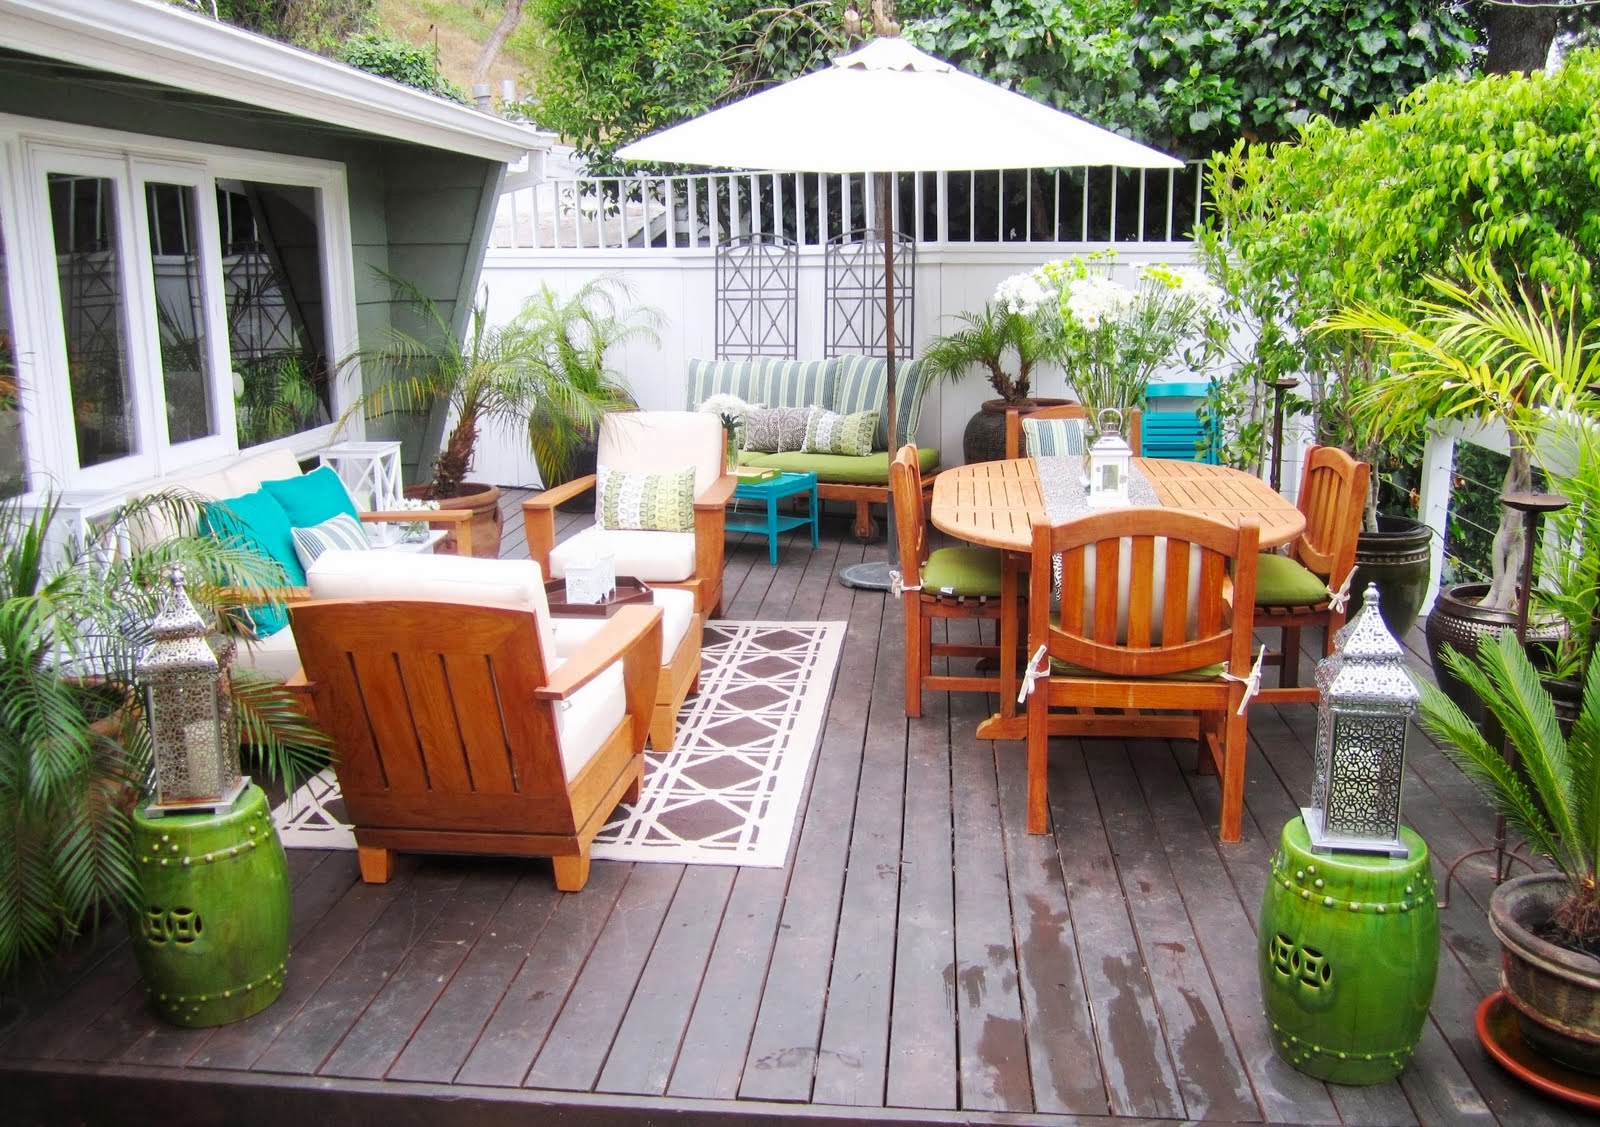 A wooden deck with outdoor furniture and potted plants featuring outdoor features.